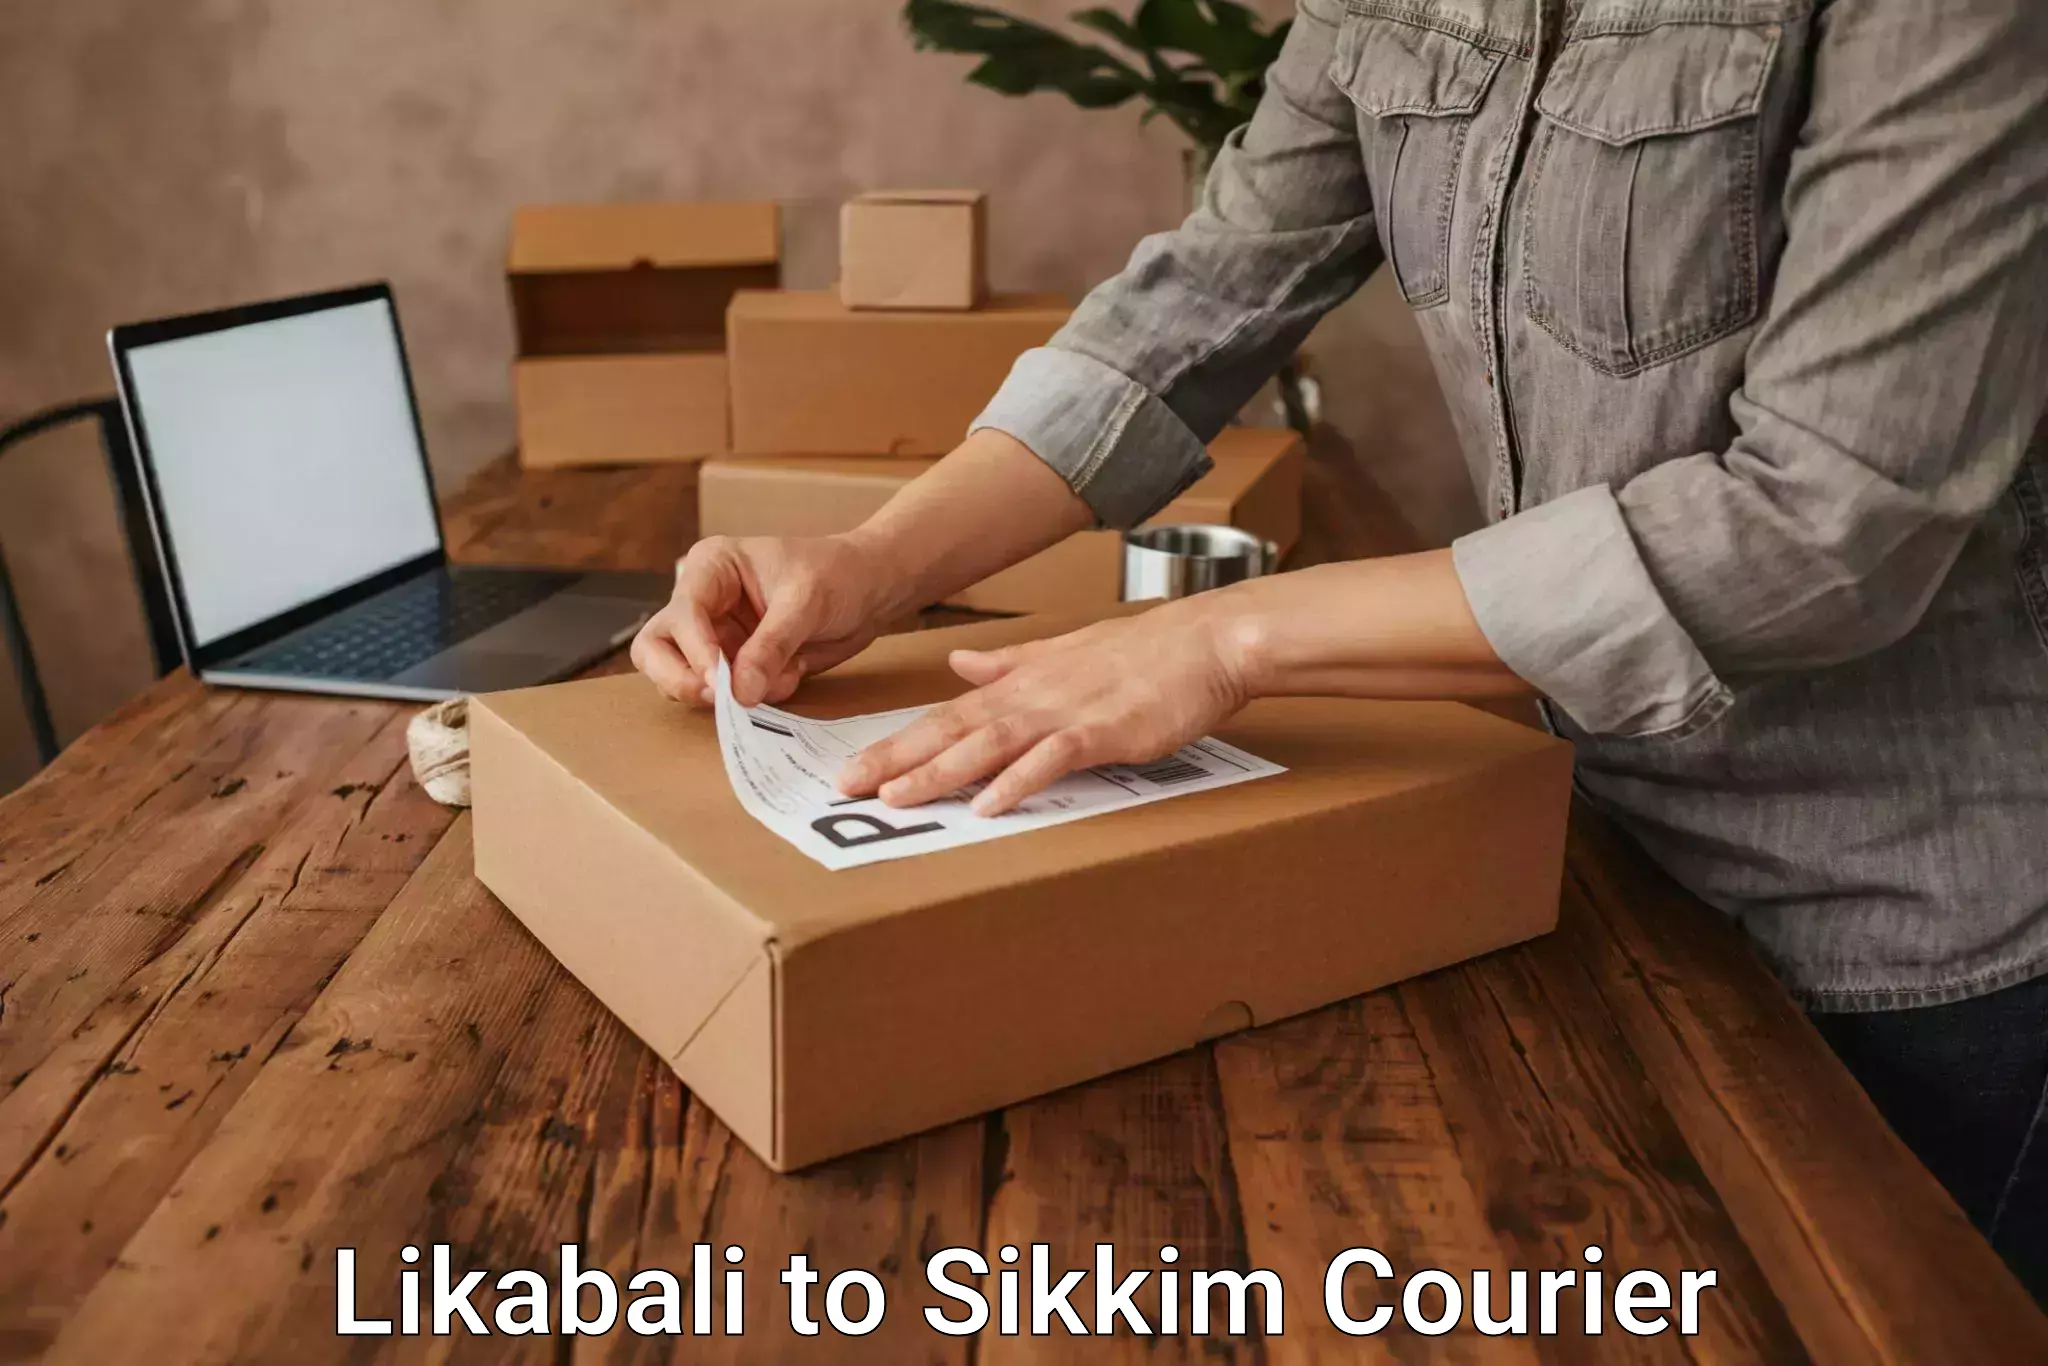 Courier service innovation Likabali to Sikkim